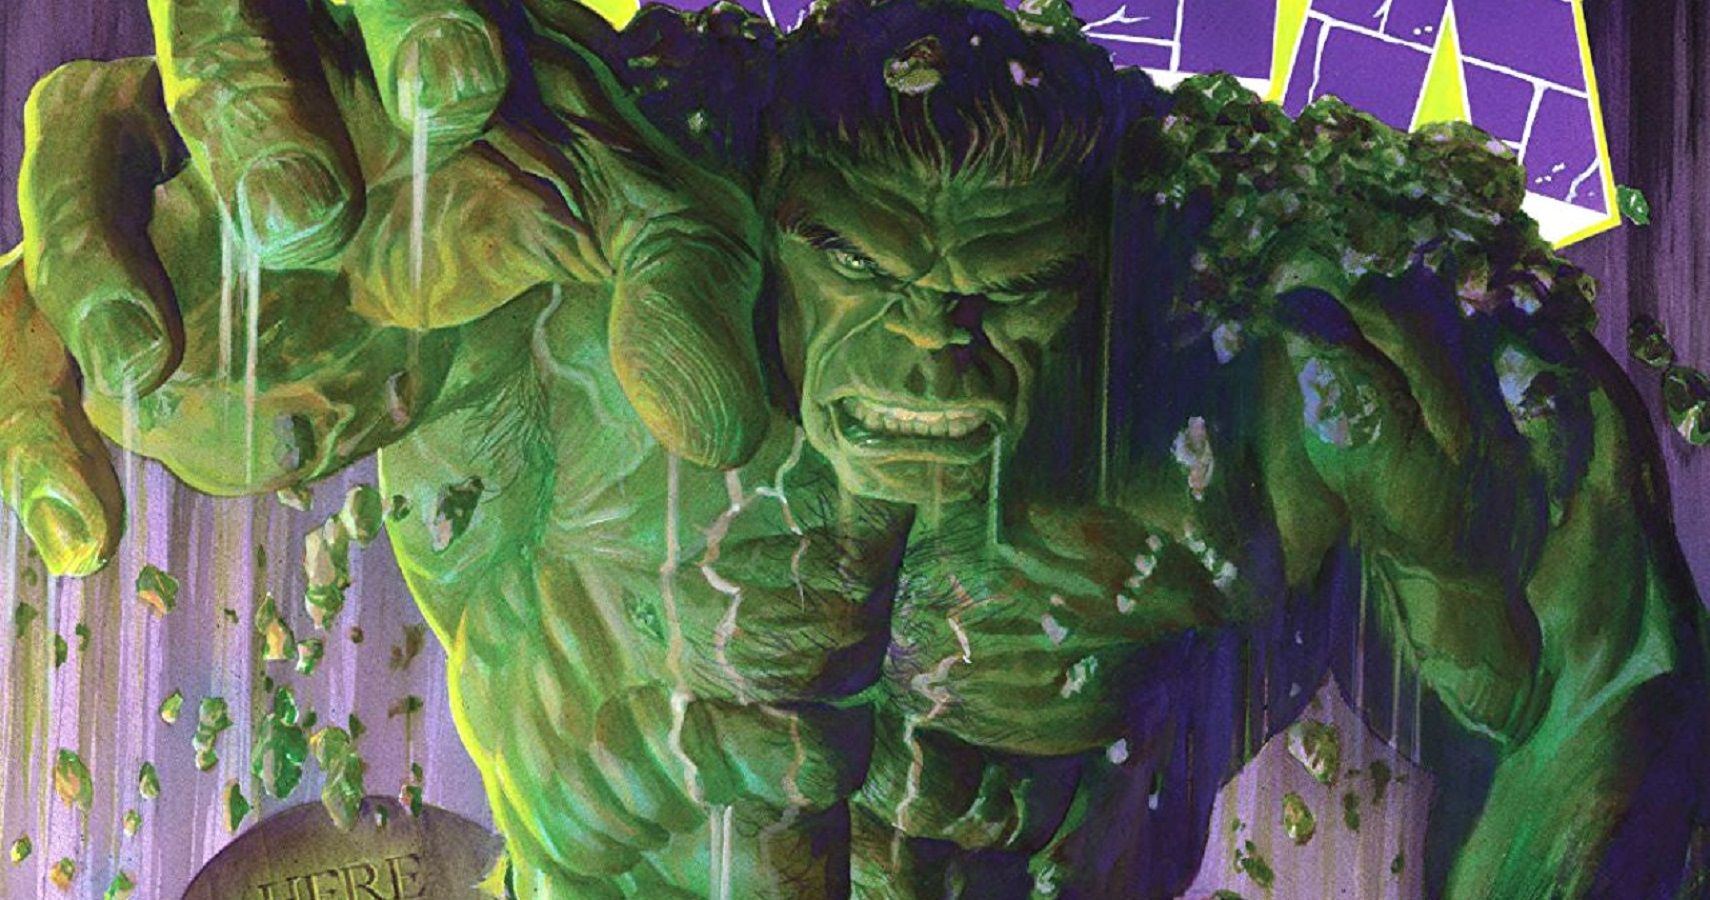 The 10 Most Shocking Things to Happen in The Immortal Hulk (So Far)